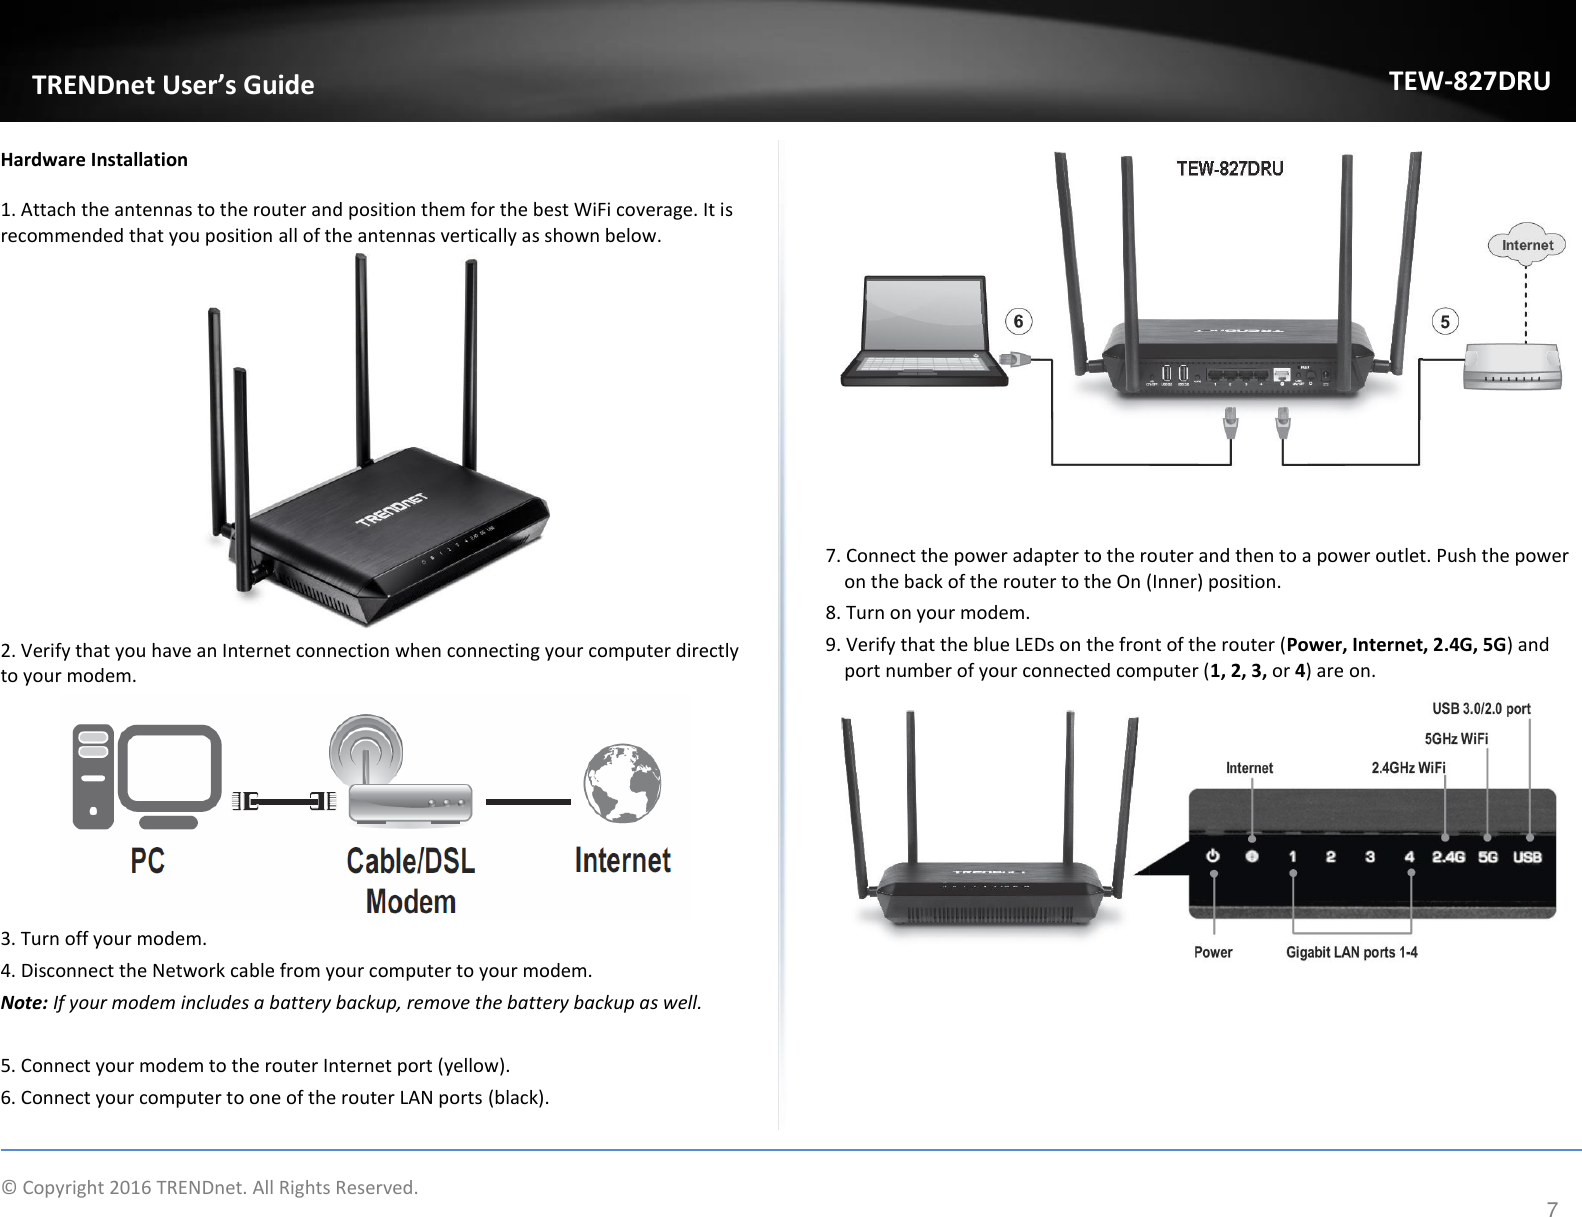             © Copyright 2016 TRENDnet. All Rights Reserved.       TRENDet User’s Guide TEW-827DRU 7 Hardware Installation 1. Attach the antennas to the router and position them for the best WiFi coverage. It is recommended that you position all of the antennas vertically as shown below.   2. Verify that you have an Internet connection when connecting your computer directly to your modem.   3. Turn off your modem. 4. Disconnect the Network cable from your computer to your modem. Note: If your modem includes a battery backup, remove the battery backup as well.  5. Connect your modem to the router Internet port (yellow). 6. Connect your computer to one of the router LAN ports (black).     7. Connect the power adapter to the router and then to a power outlet. Push the power on the back of the router to the On (Inner) position. 8. Turn on your modem.  9. Verify that the blue LEDs on the front of the router (Power, Internet, 2.4G, 5G) and port number of your connected computer (1, 2, 3, or 4) are on.      